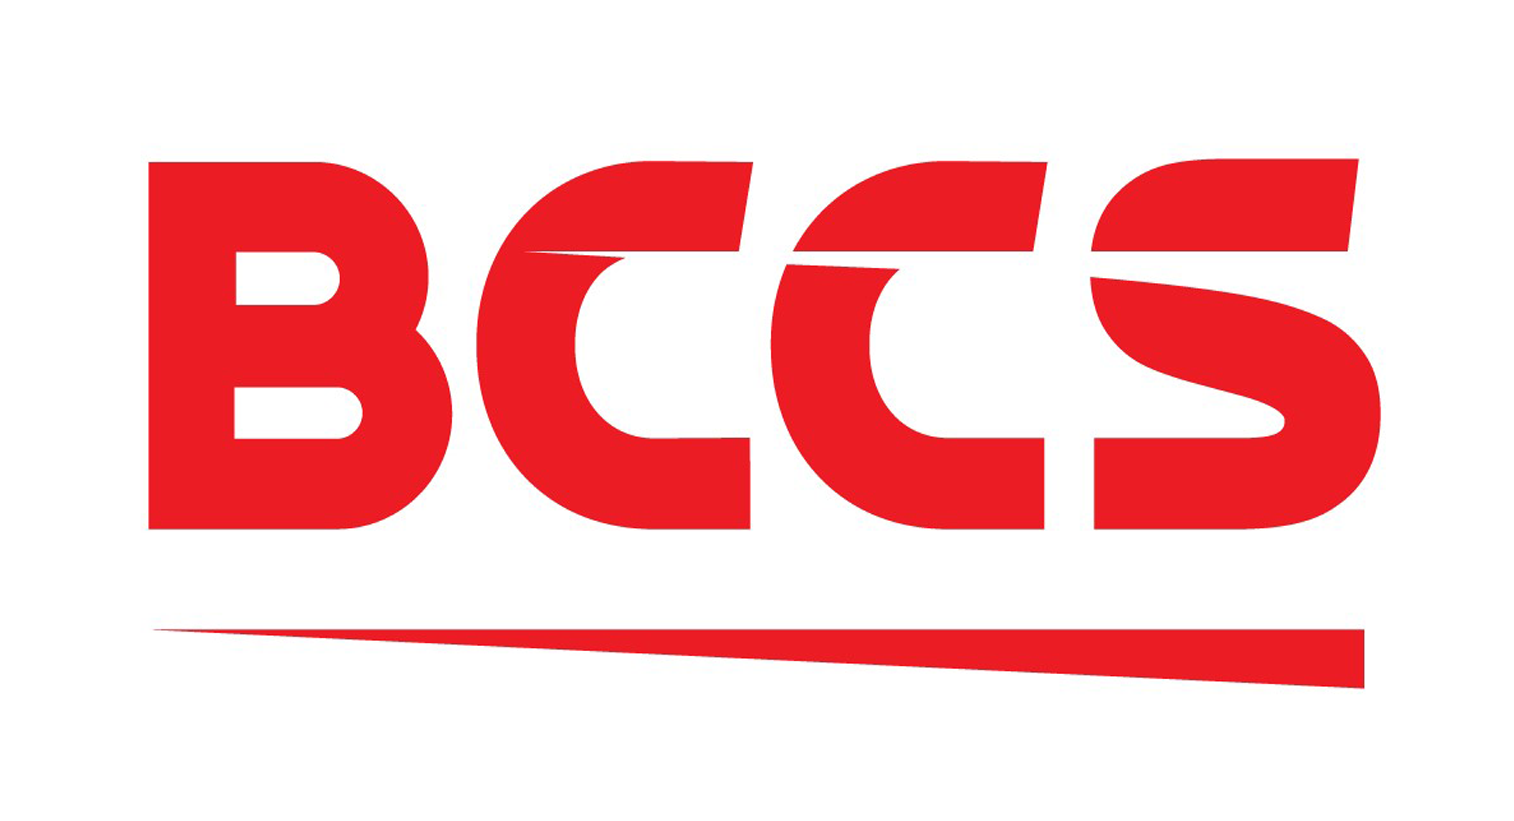 BCCS - Body Corporate Cleaning Services